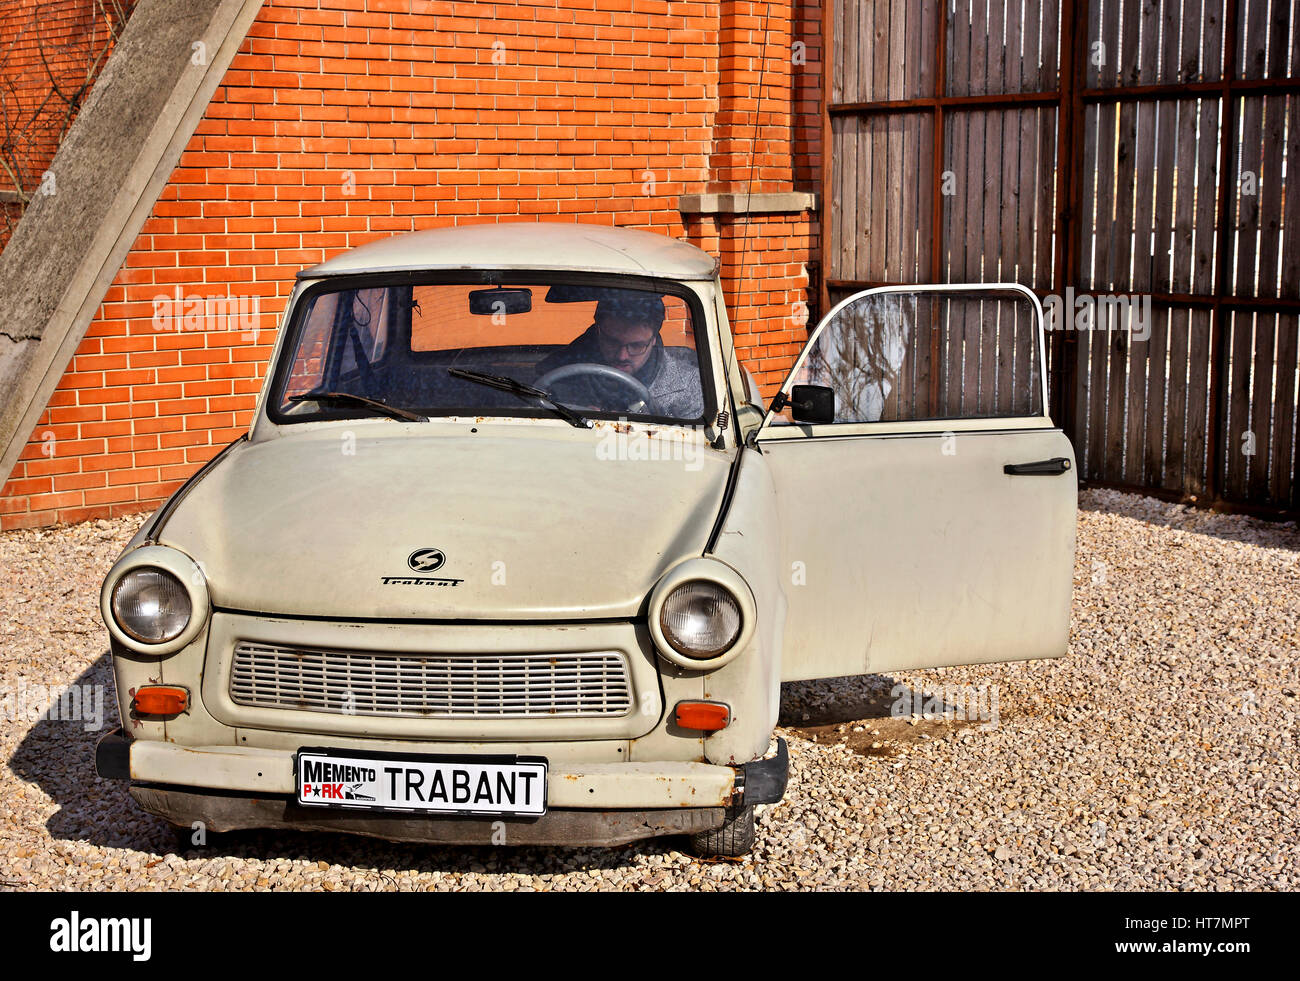 A Trabant, the legendary East German car, a 'symbol' of the communist era  in Memento Park, an open-air museum about 10 km SW of Budapest, Hungary Stock Photo